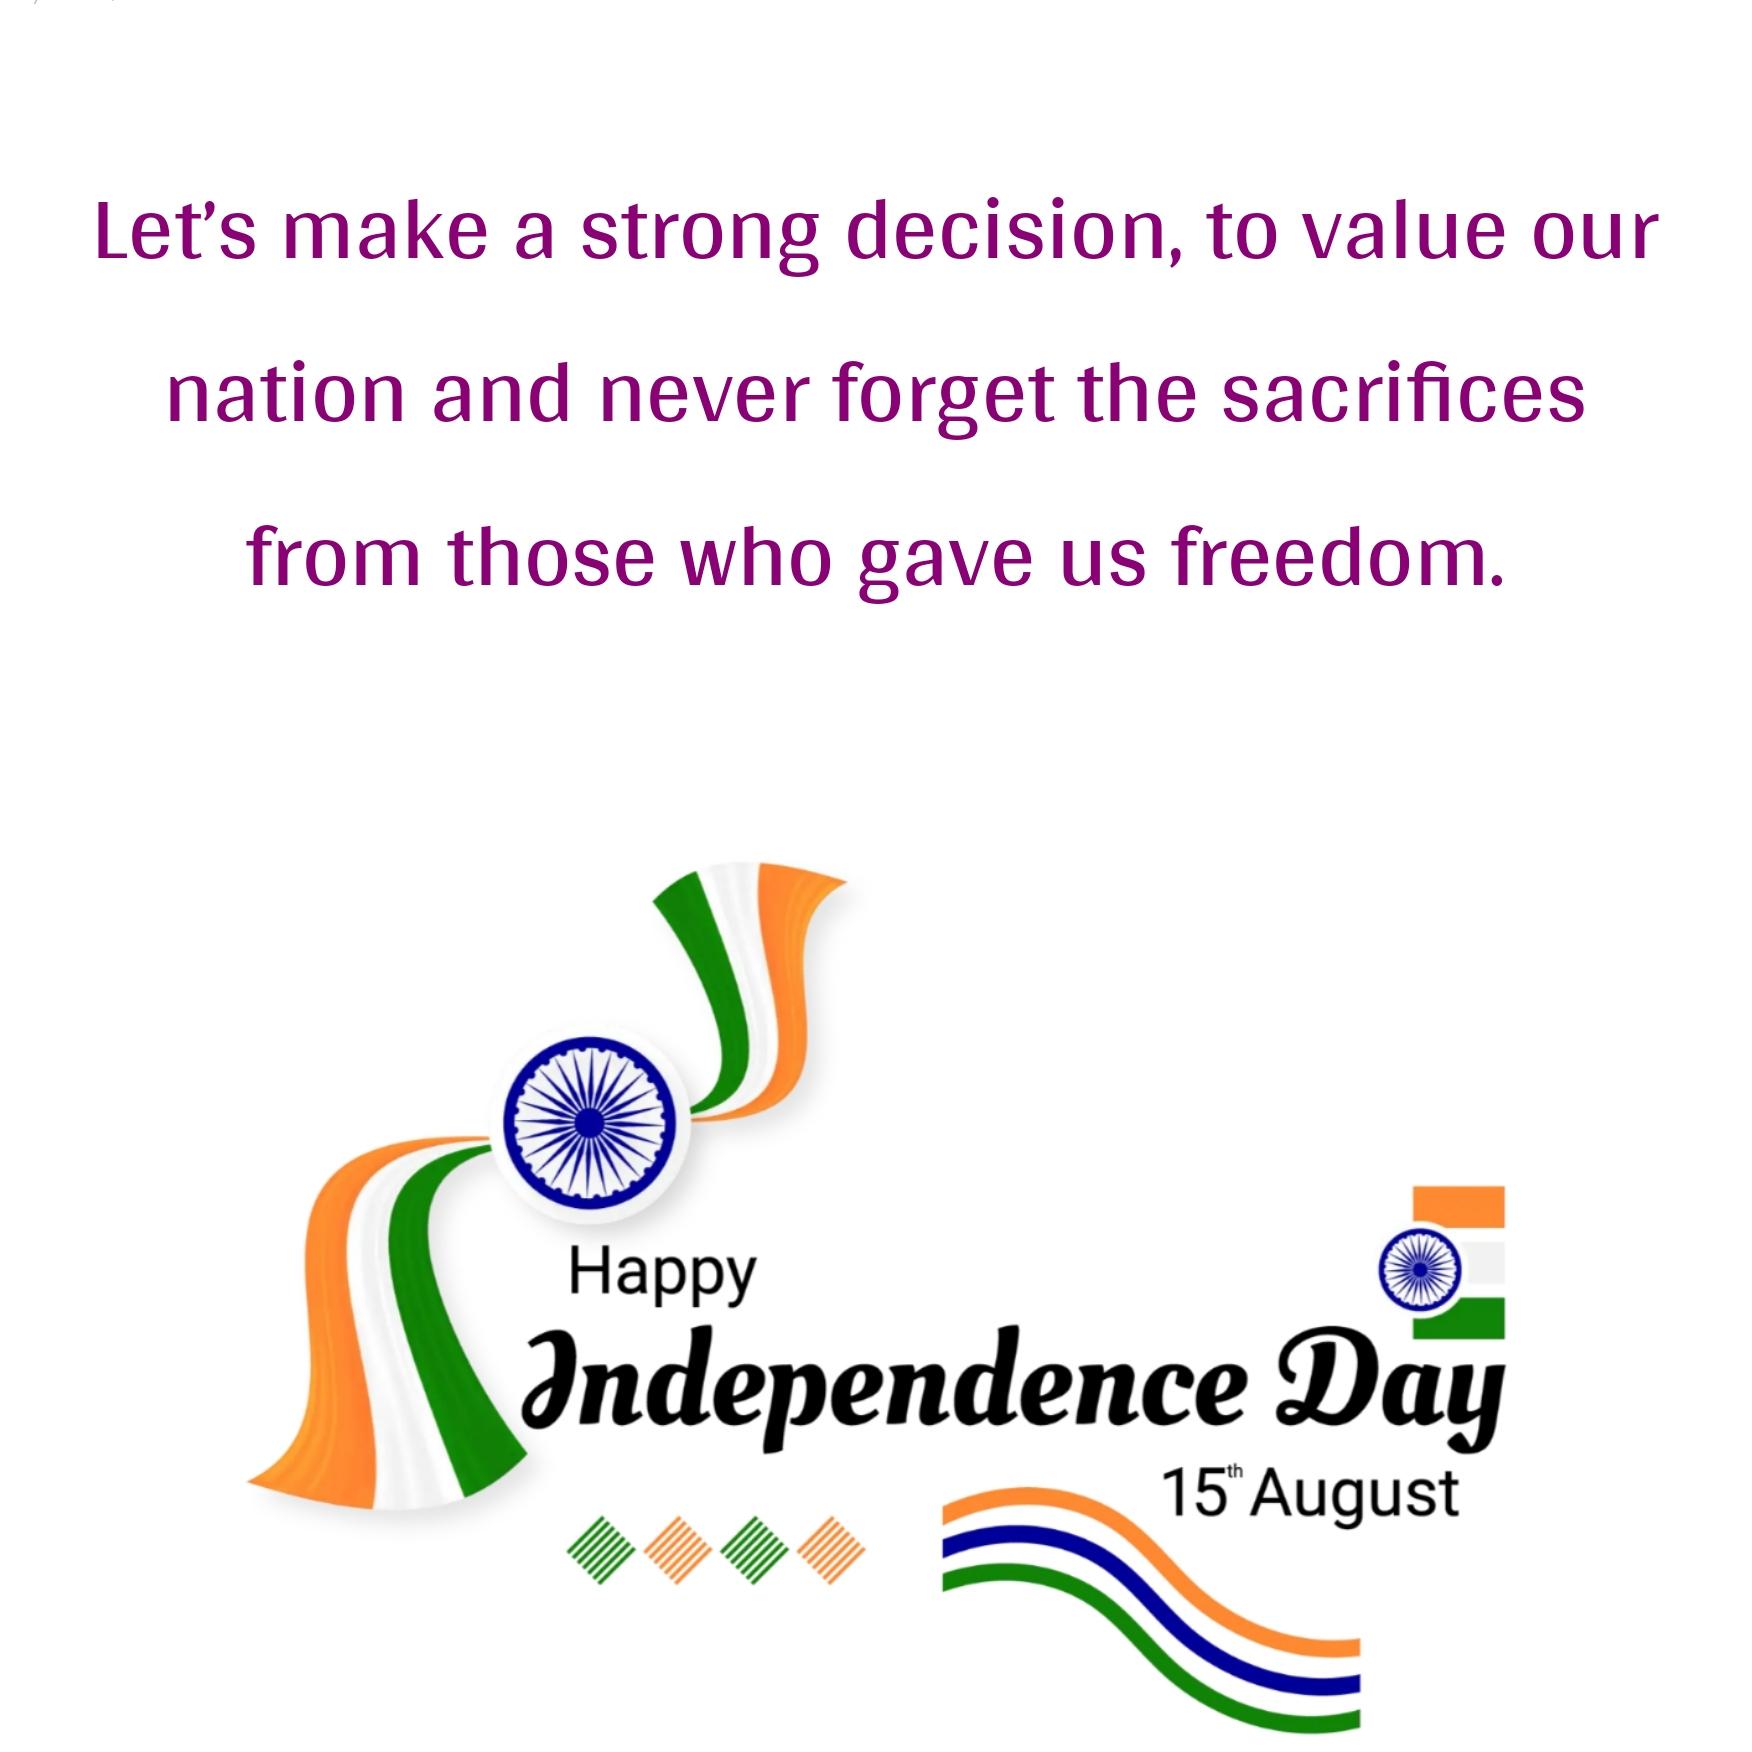 Lets make a strong decision to value our nation